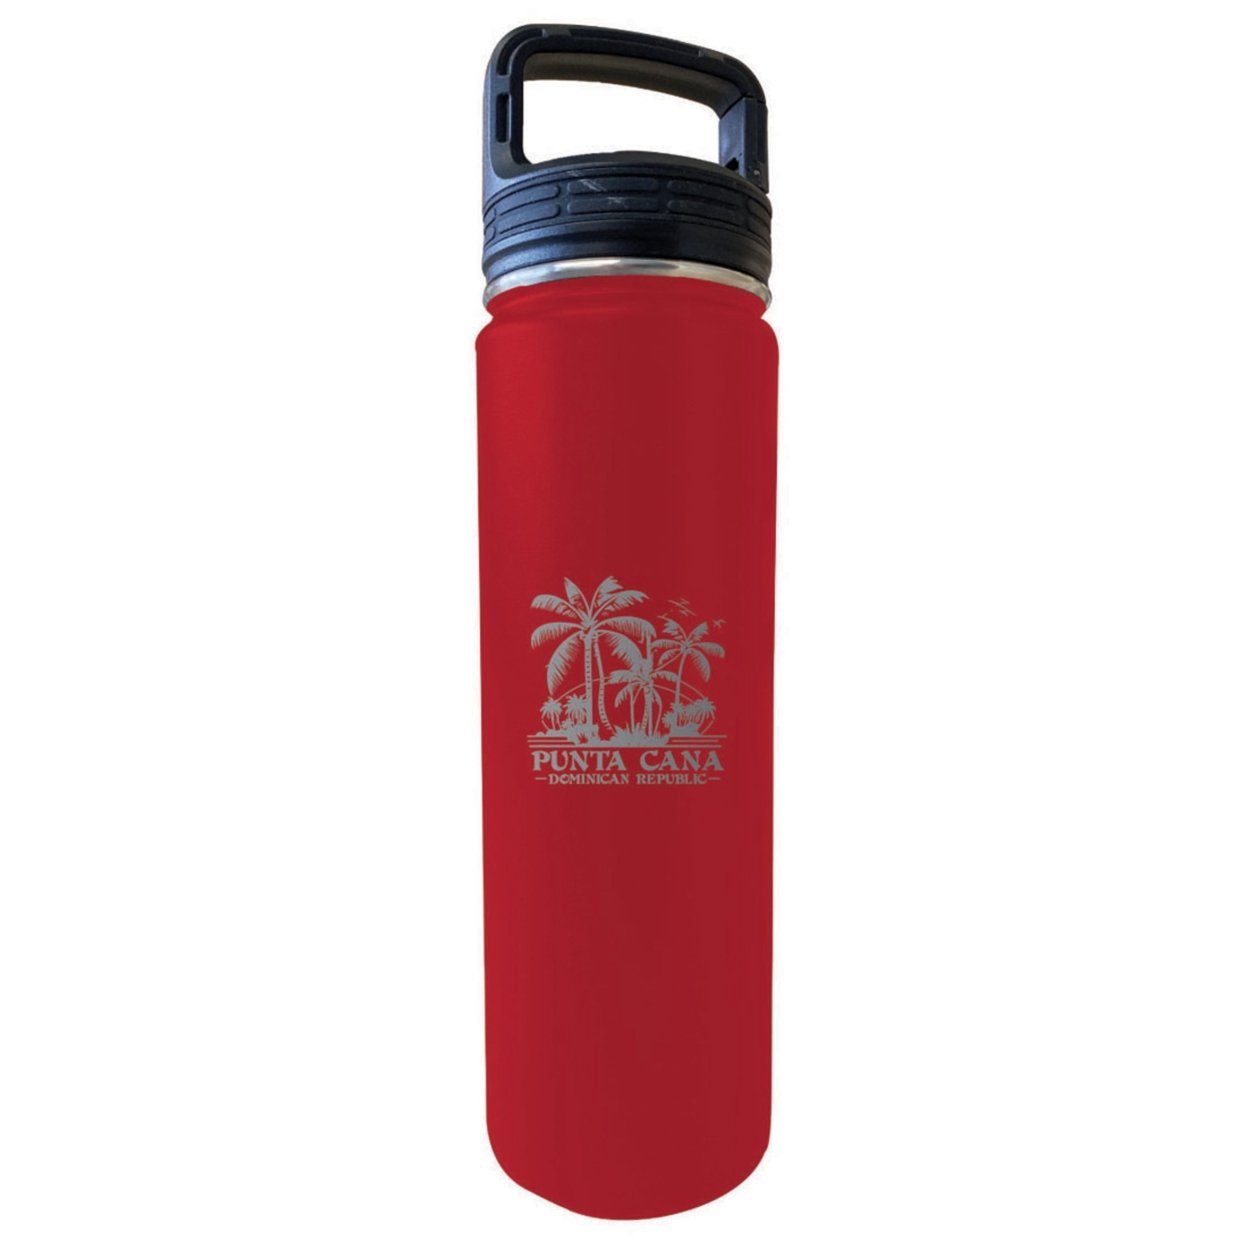 Punta Cana Dominican Republic Souvenir 32 Oz Insulated Stainless Steel Tumbler - Red, Palm